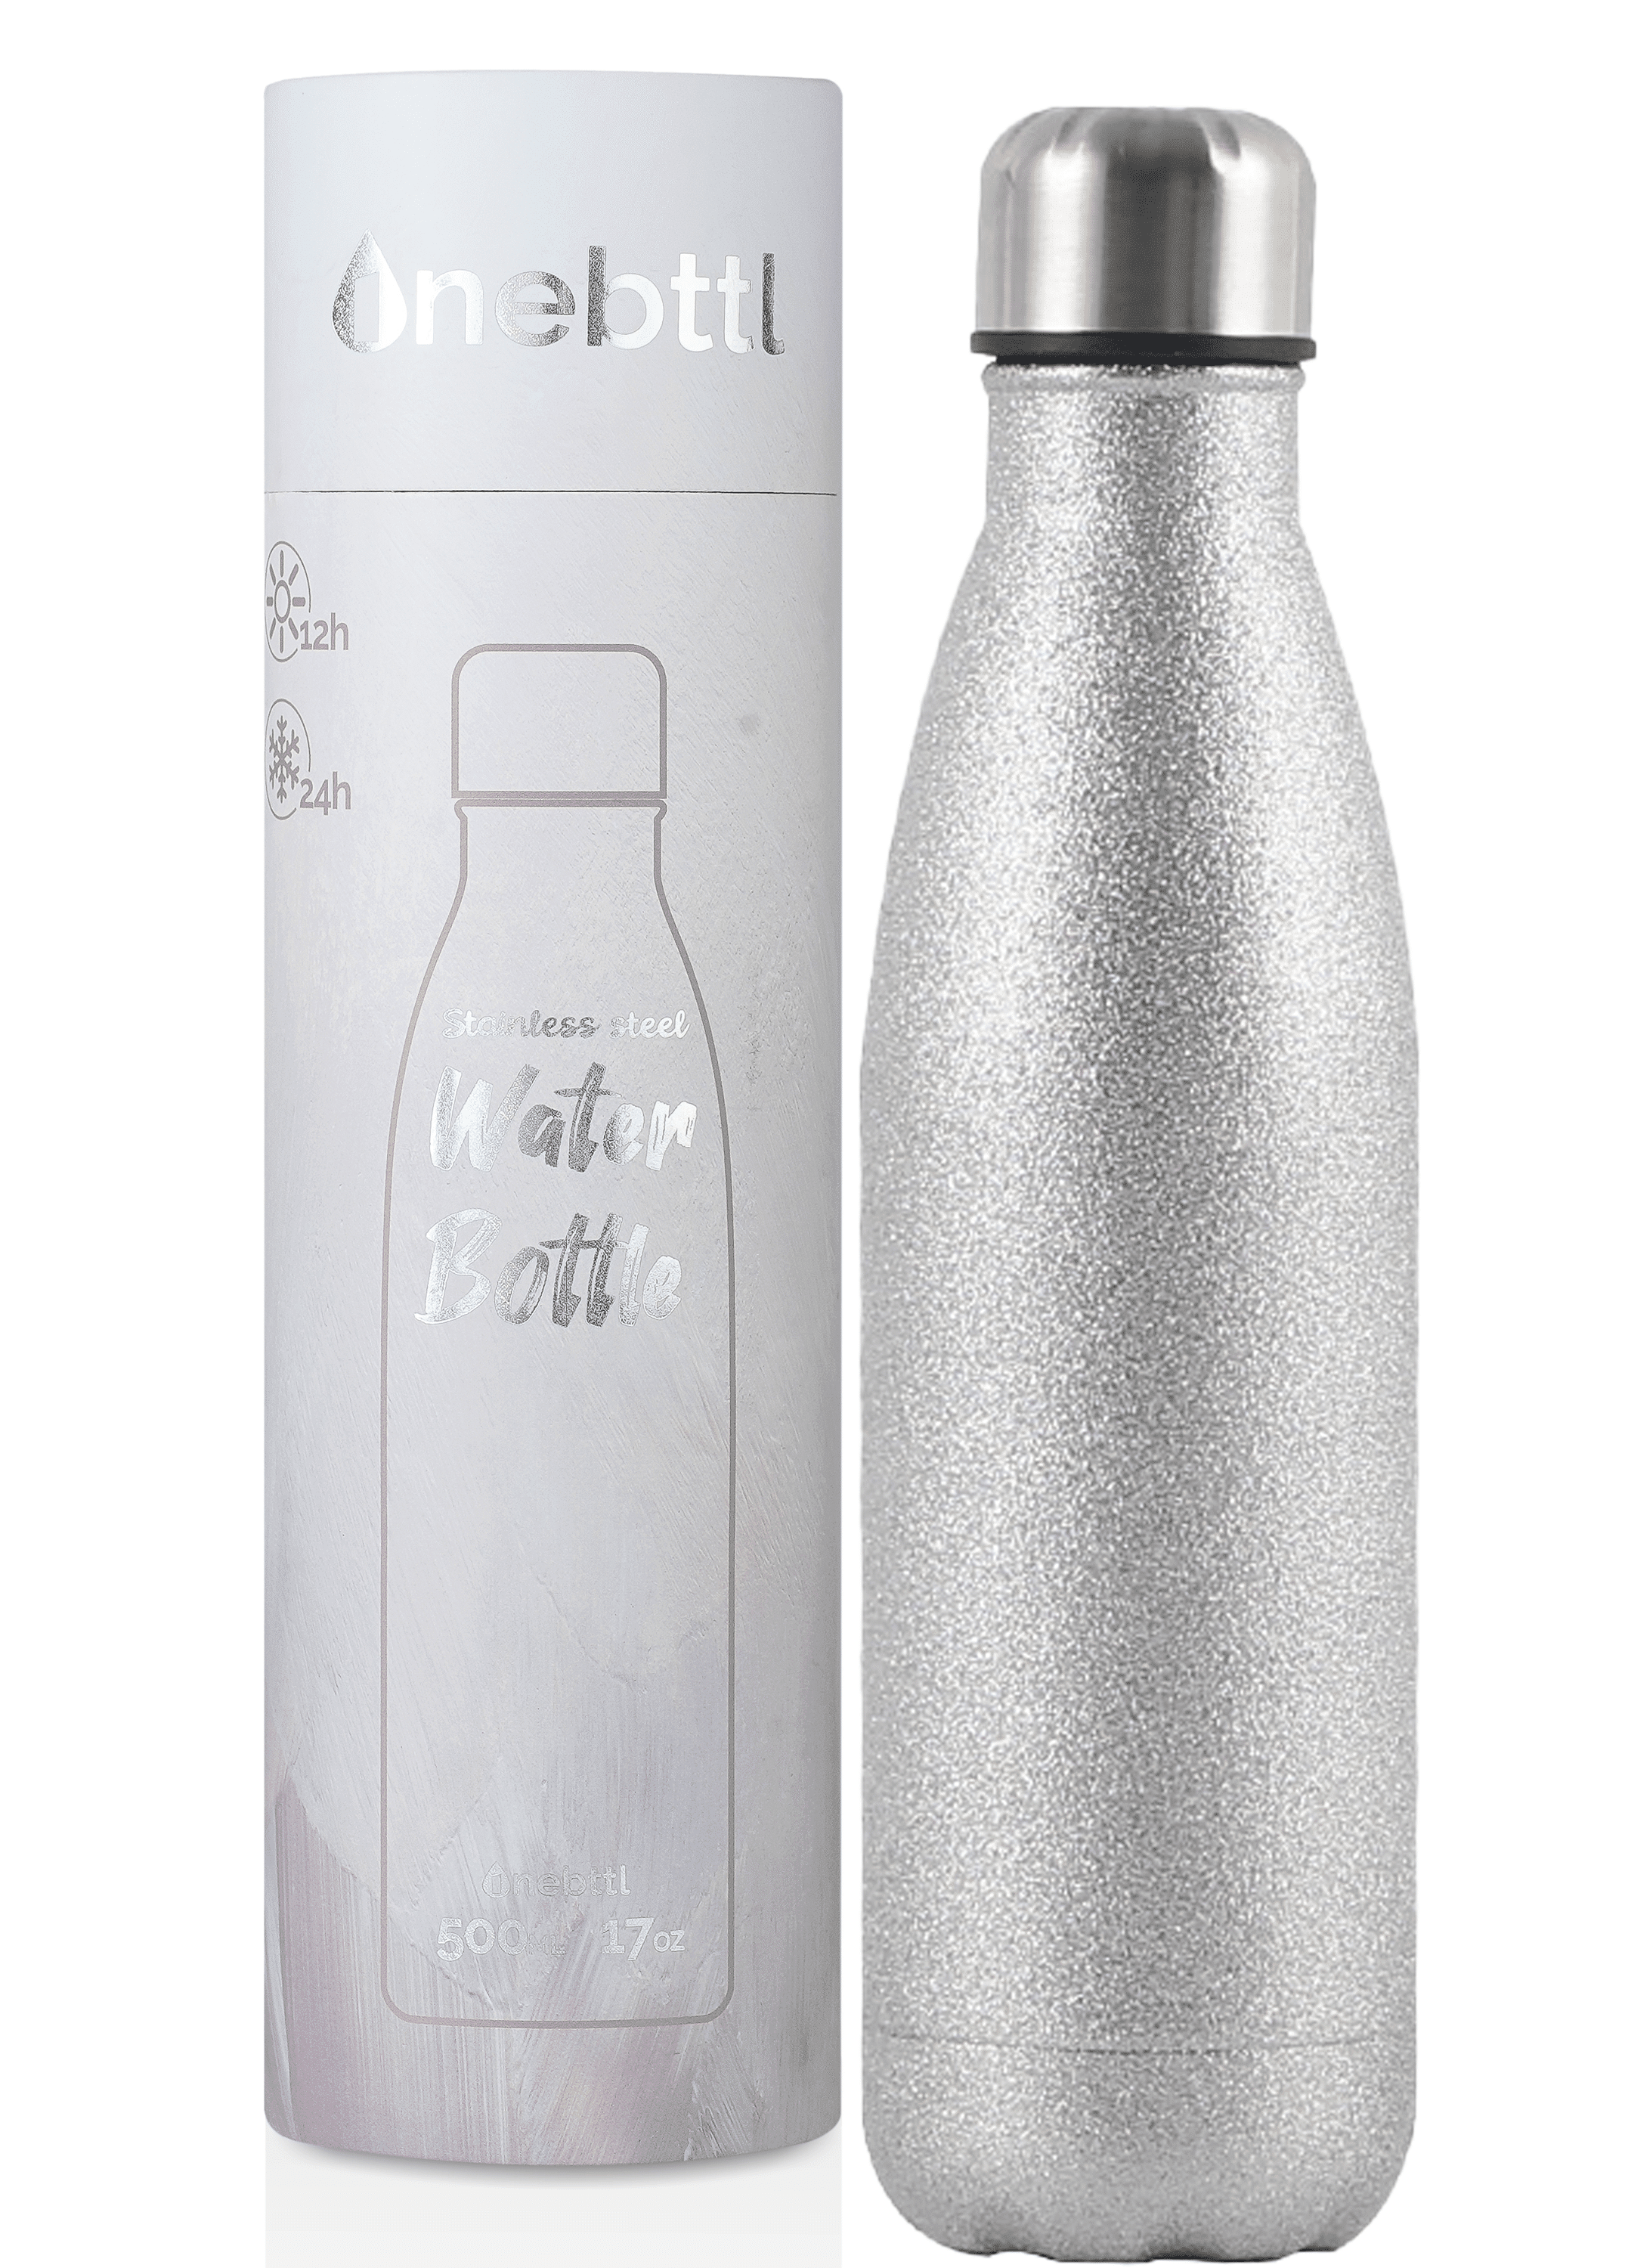 Man-up 17oz double walled thermal water bottle flask silver 